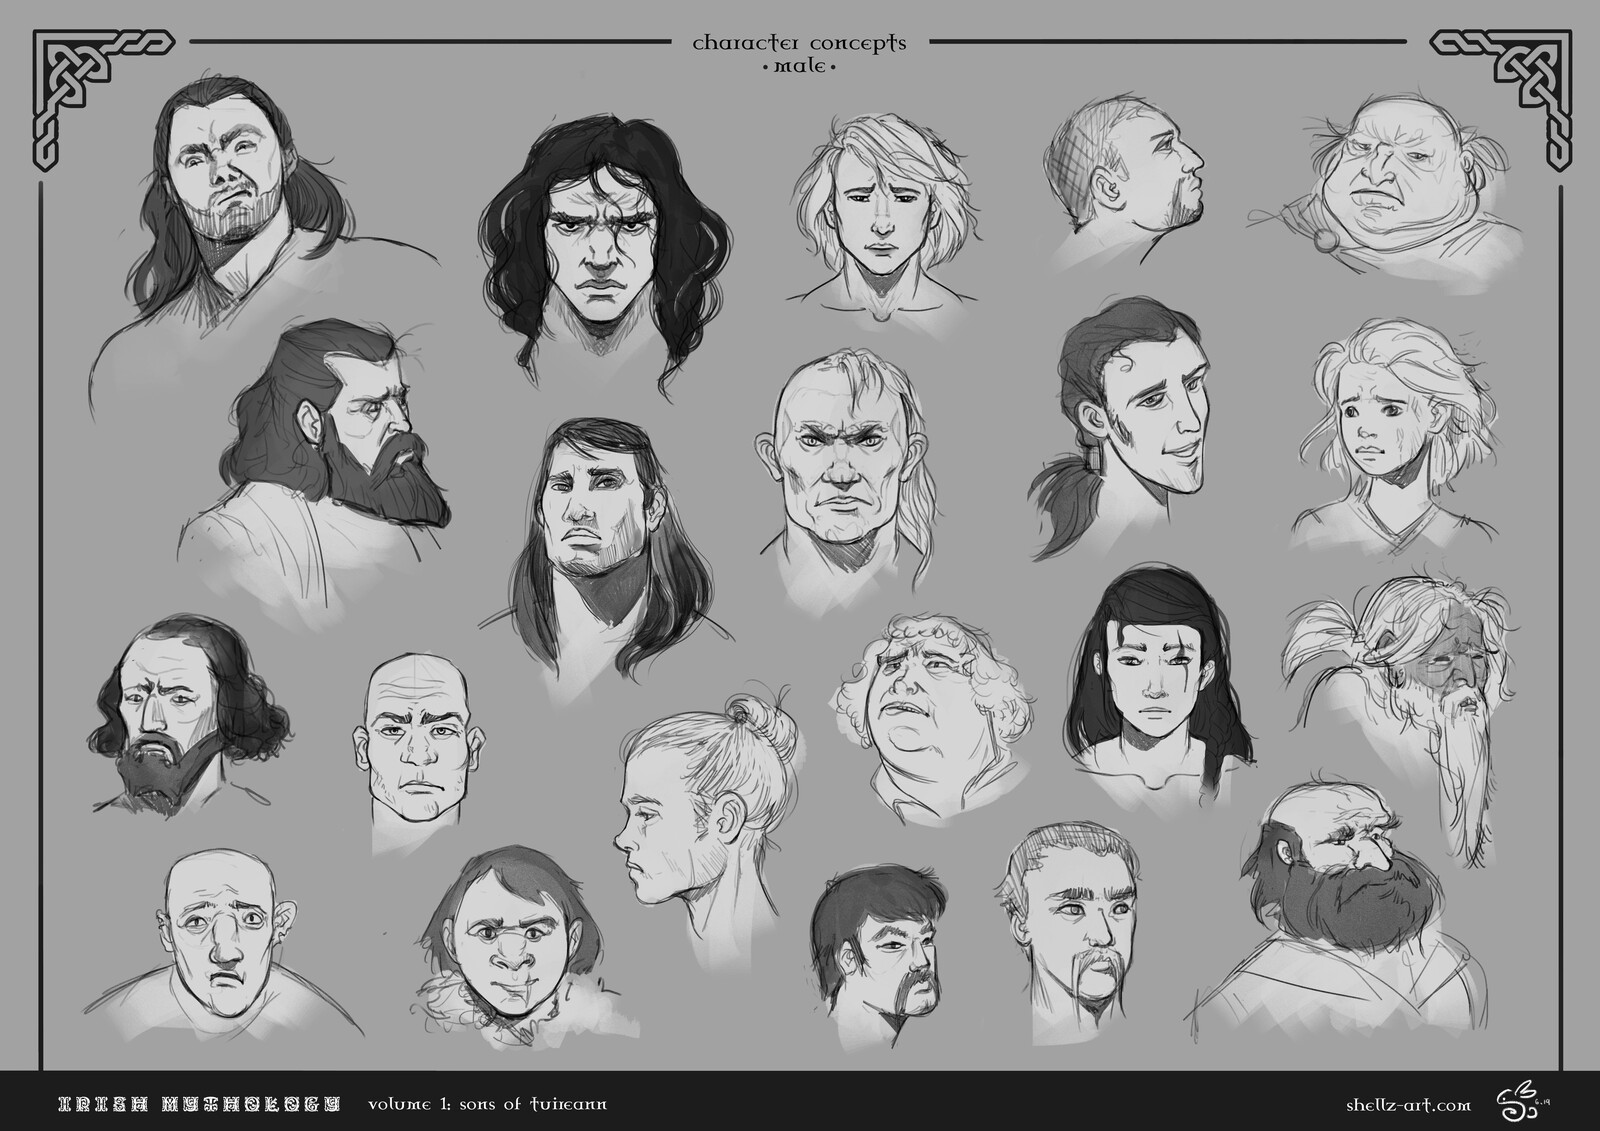 Sons of Tuireann: Character Concepts - Male